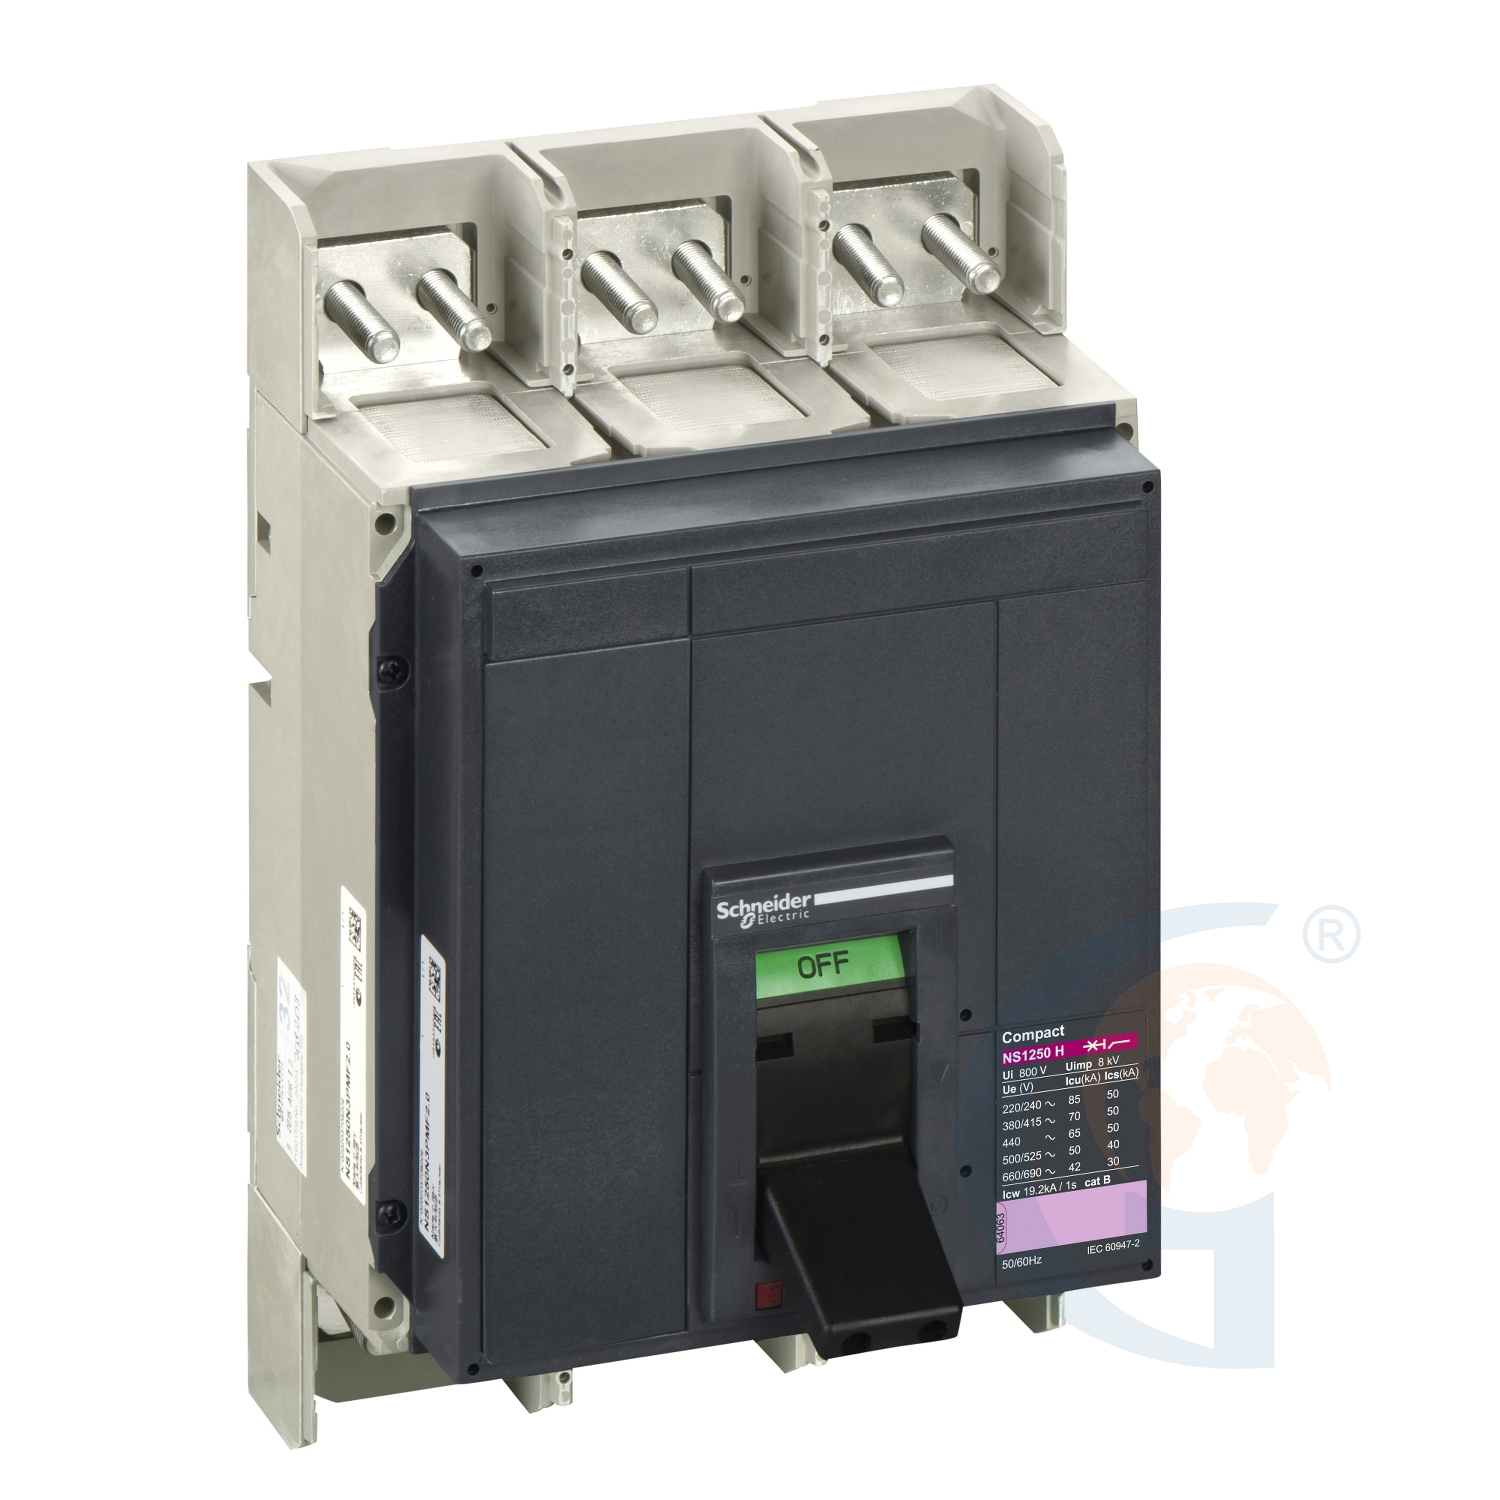 Schneider Electric 33251 circuit breaker basic frame, Compact NS 1250H, 70 kA at 415 VAC 50/60 Hz, 1250 A, fixed, manually operated, without trip unit, 3 poles https://gesrepair.com/wp-content/uploads/2020/Schneider/Schneider_Electric_33251_.jpg